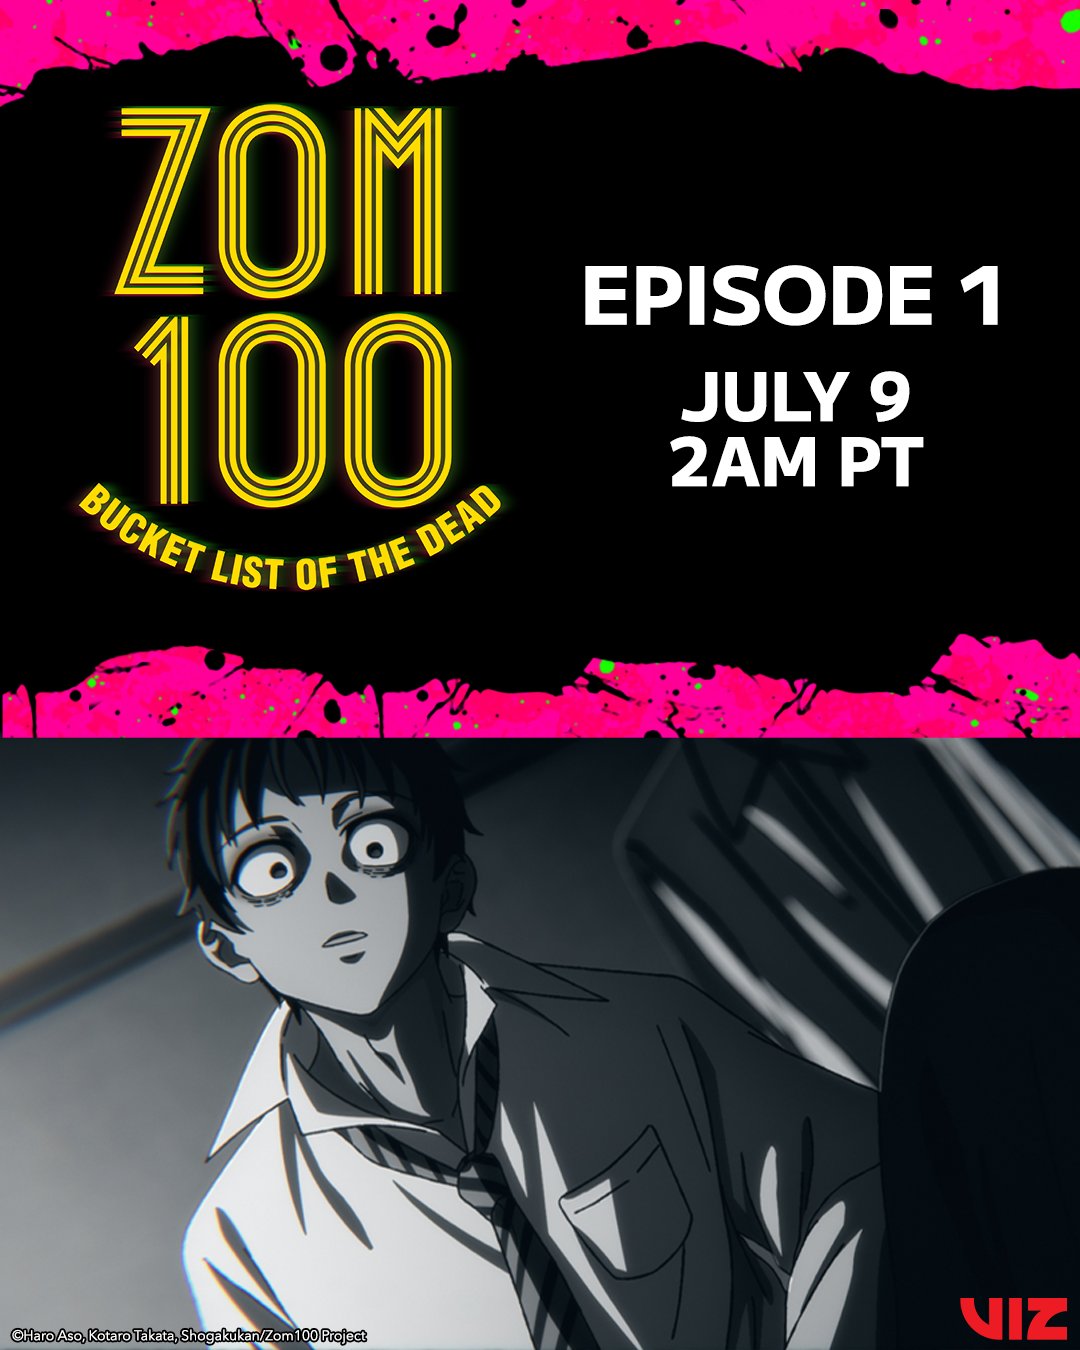 Zom 100: Bucket List of the Dead' Comes to Crunchyroll